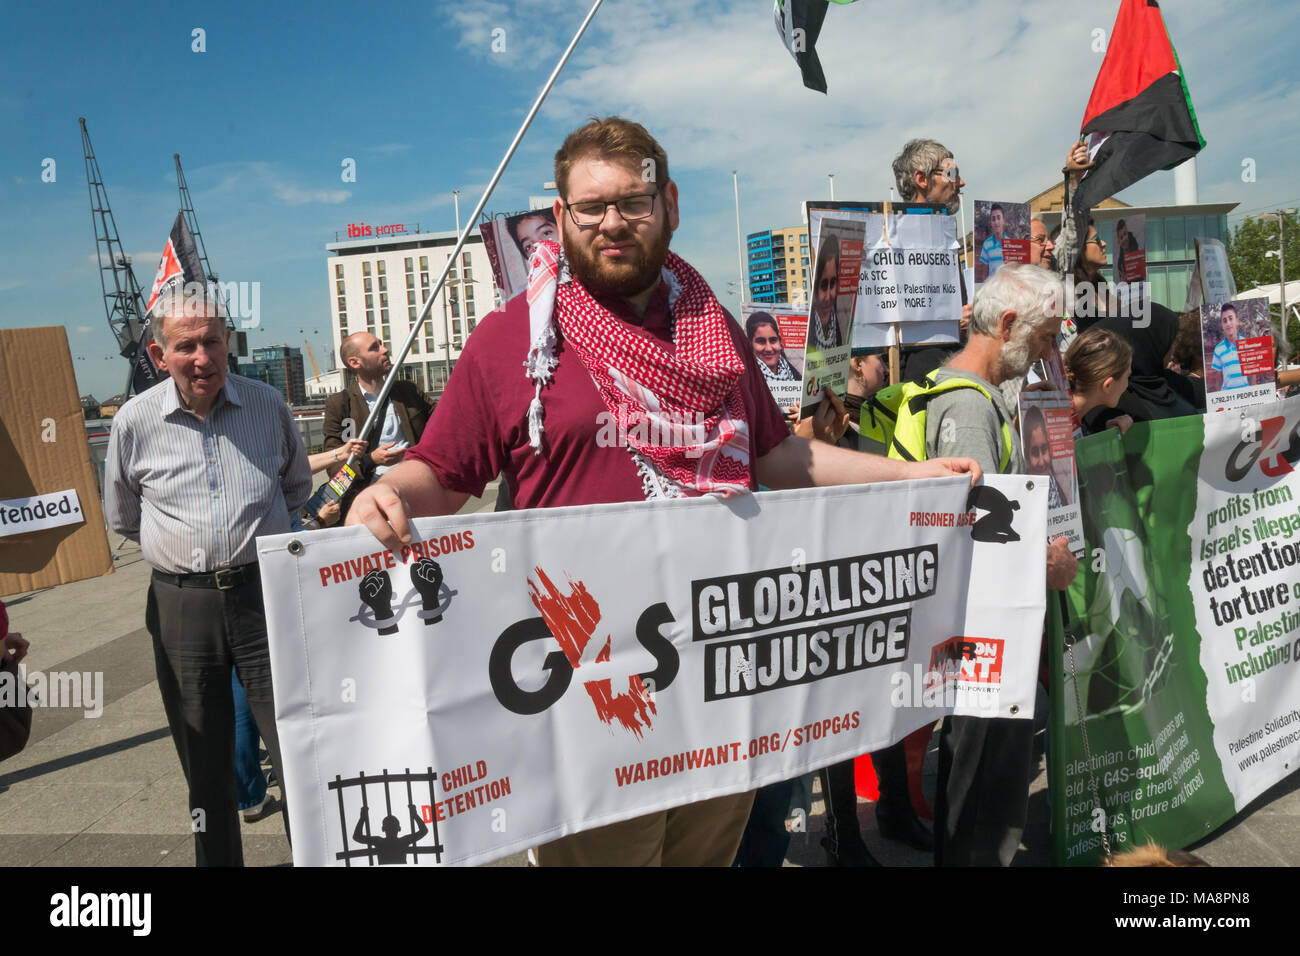 A man holds a War on Want banner 'G4S Globalising Injustice' at the Stop G4S protest outside G4S AGM at Excel London. Stock Photo